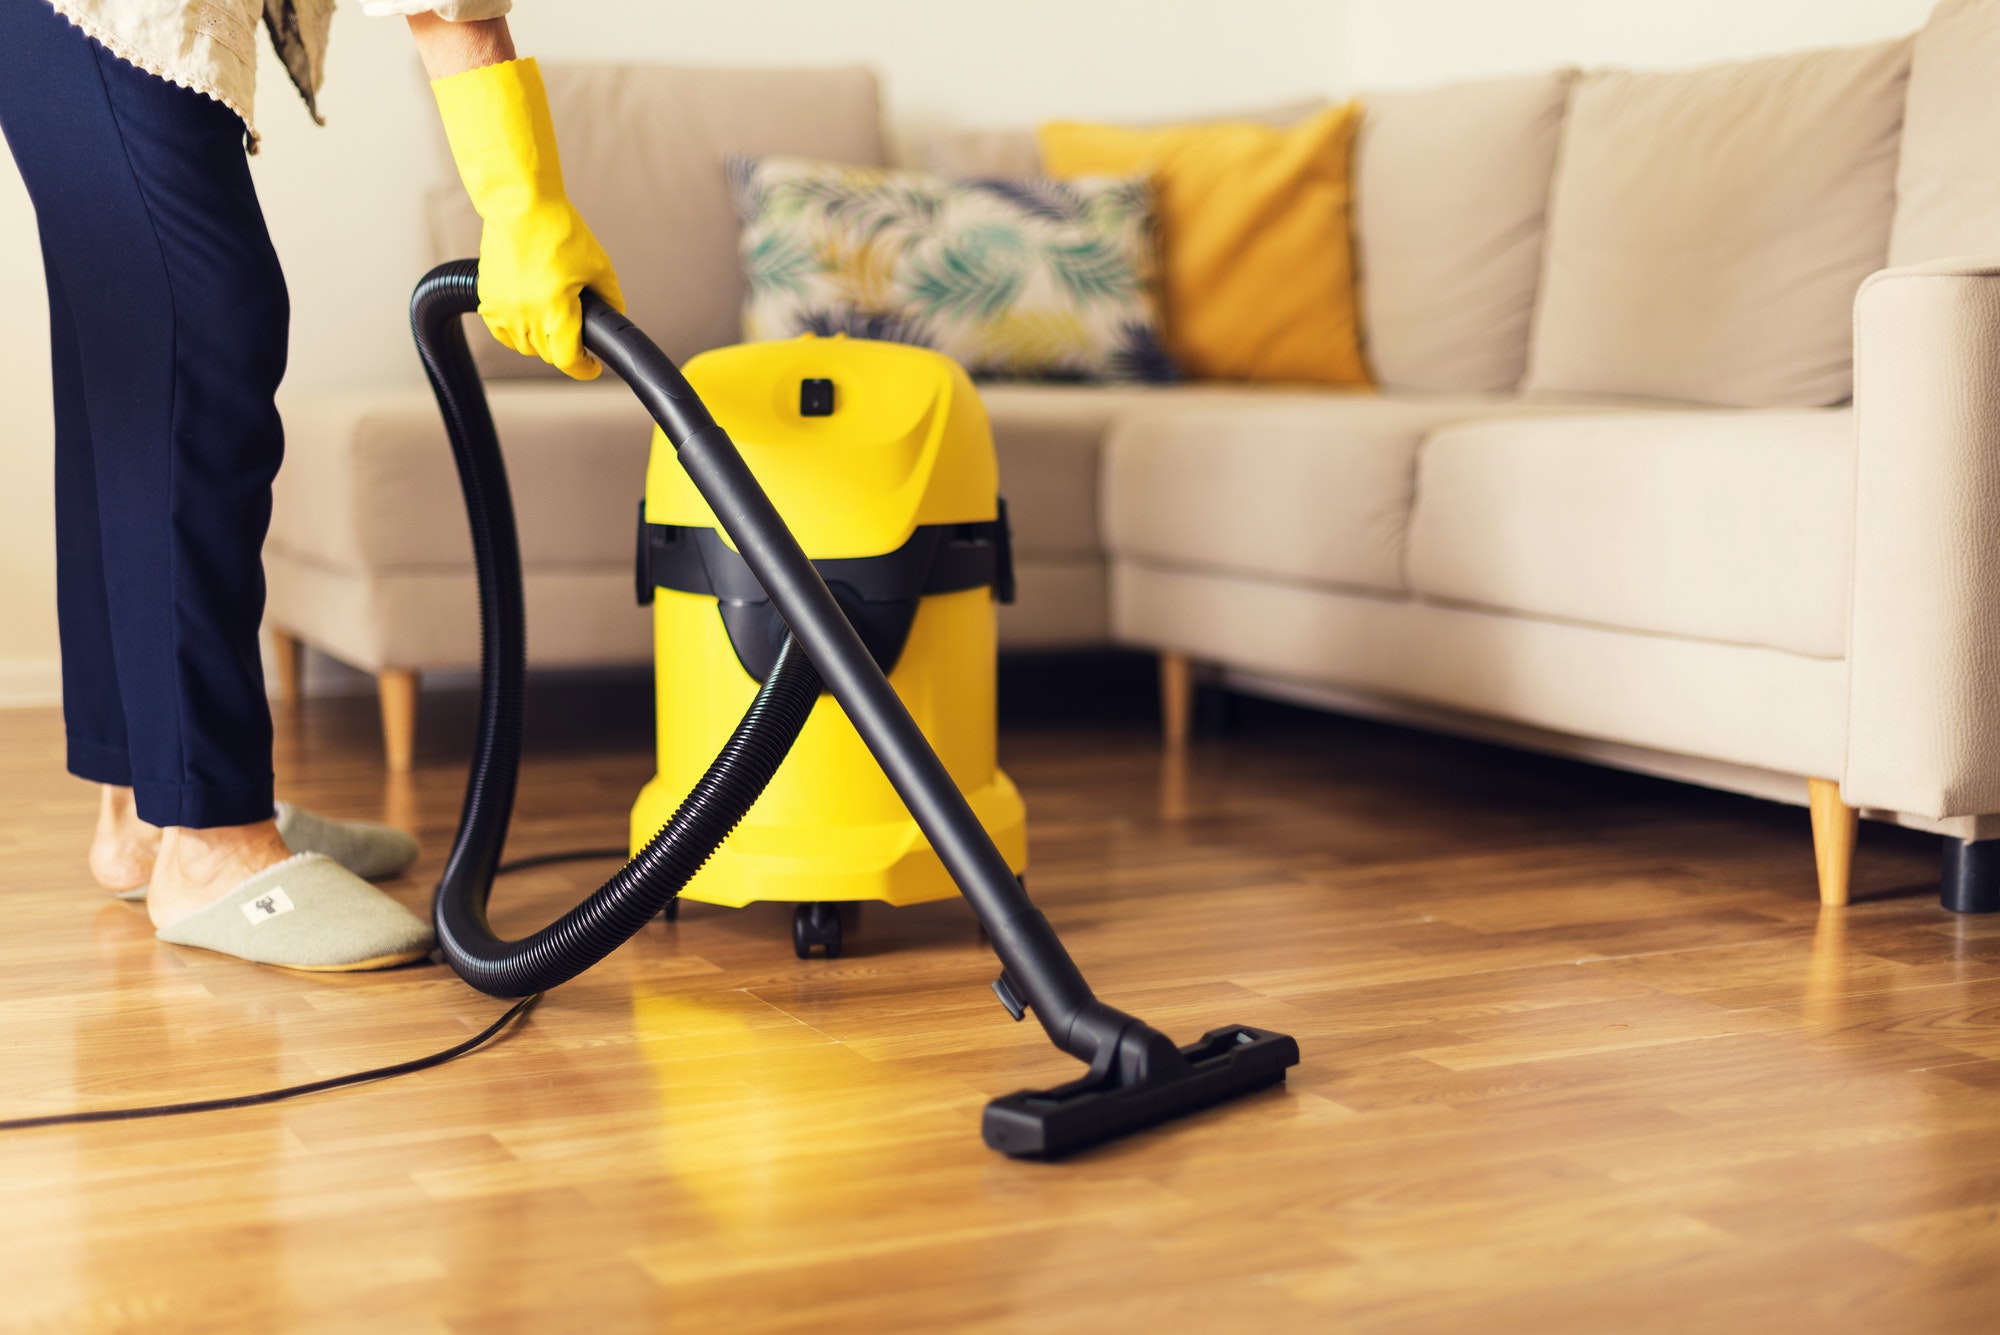 woman-cleaning-sofa-with-yellow-vacuum-cleaner-copy-space-cleaning-service-concept.jpg